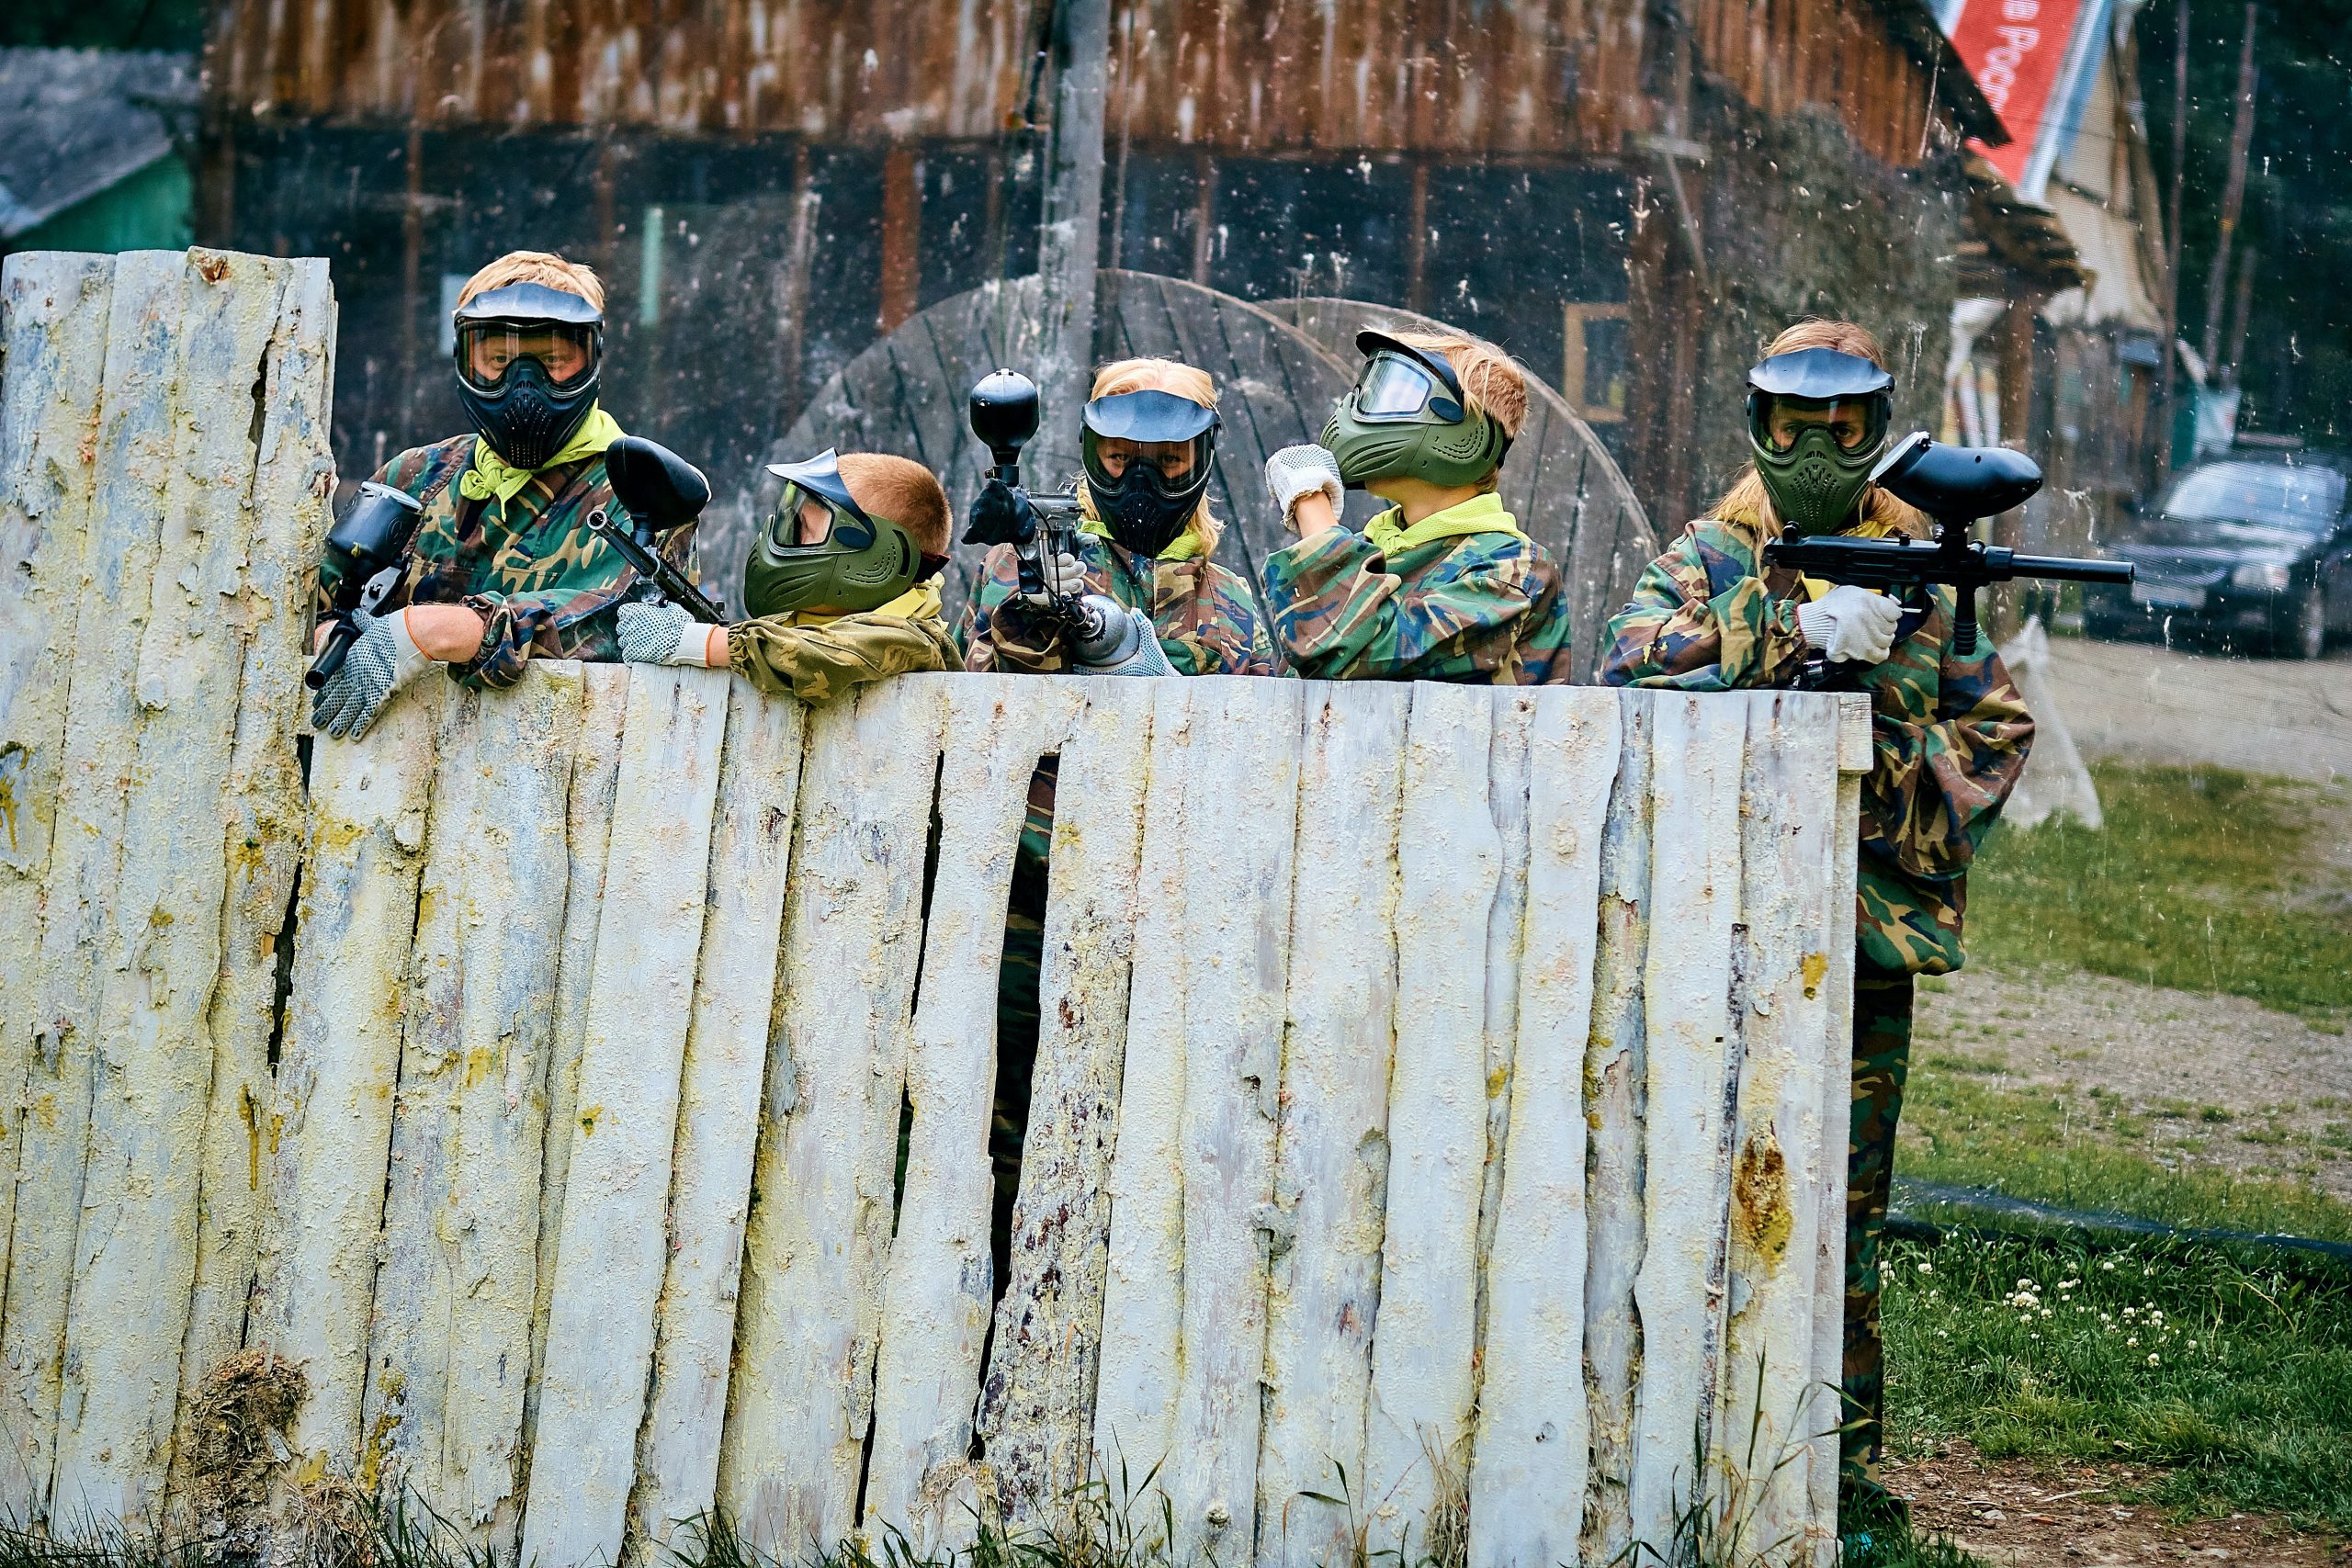 Paintballing in Carrick on Shannon